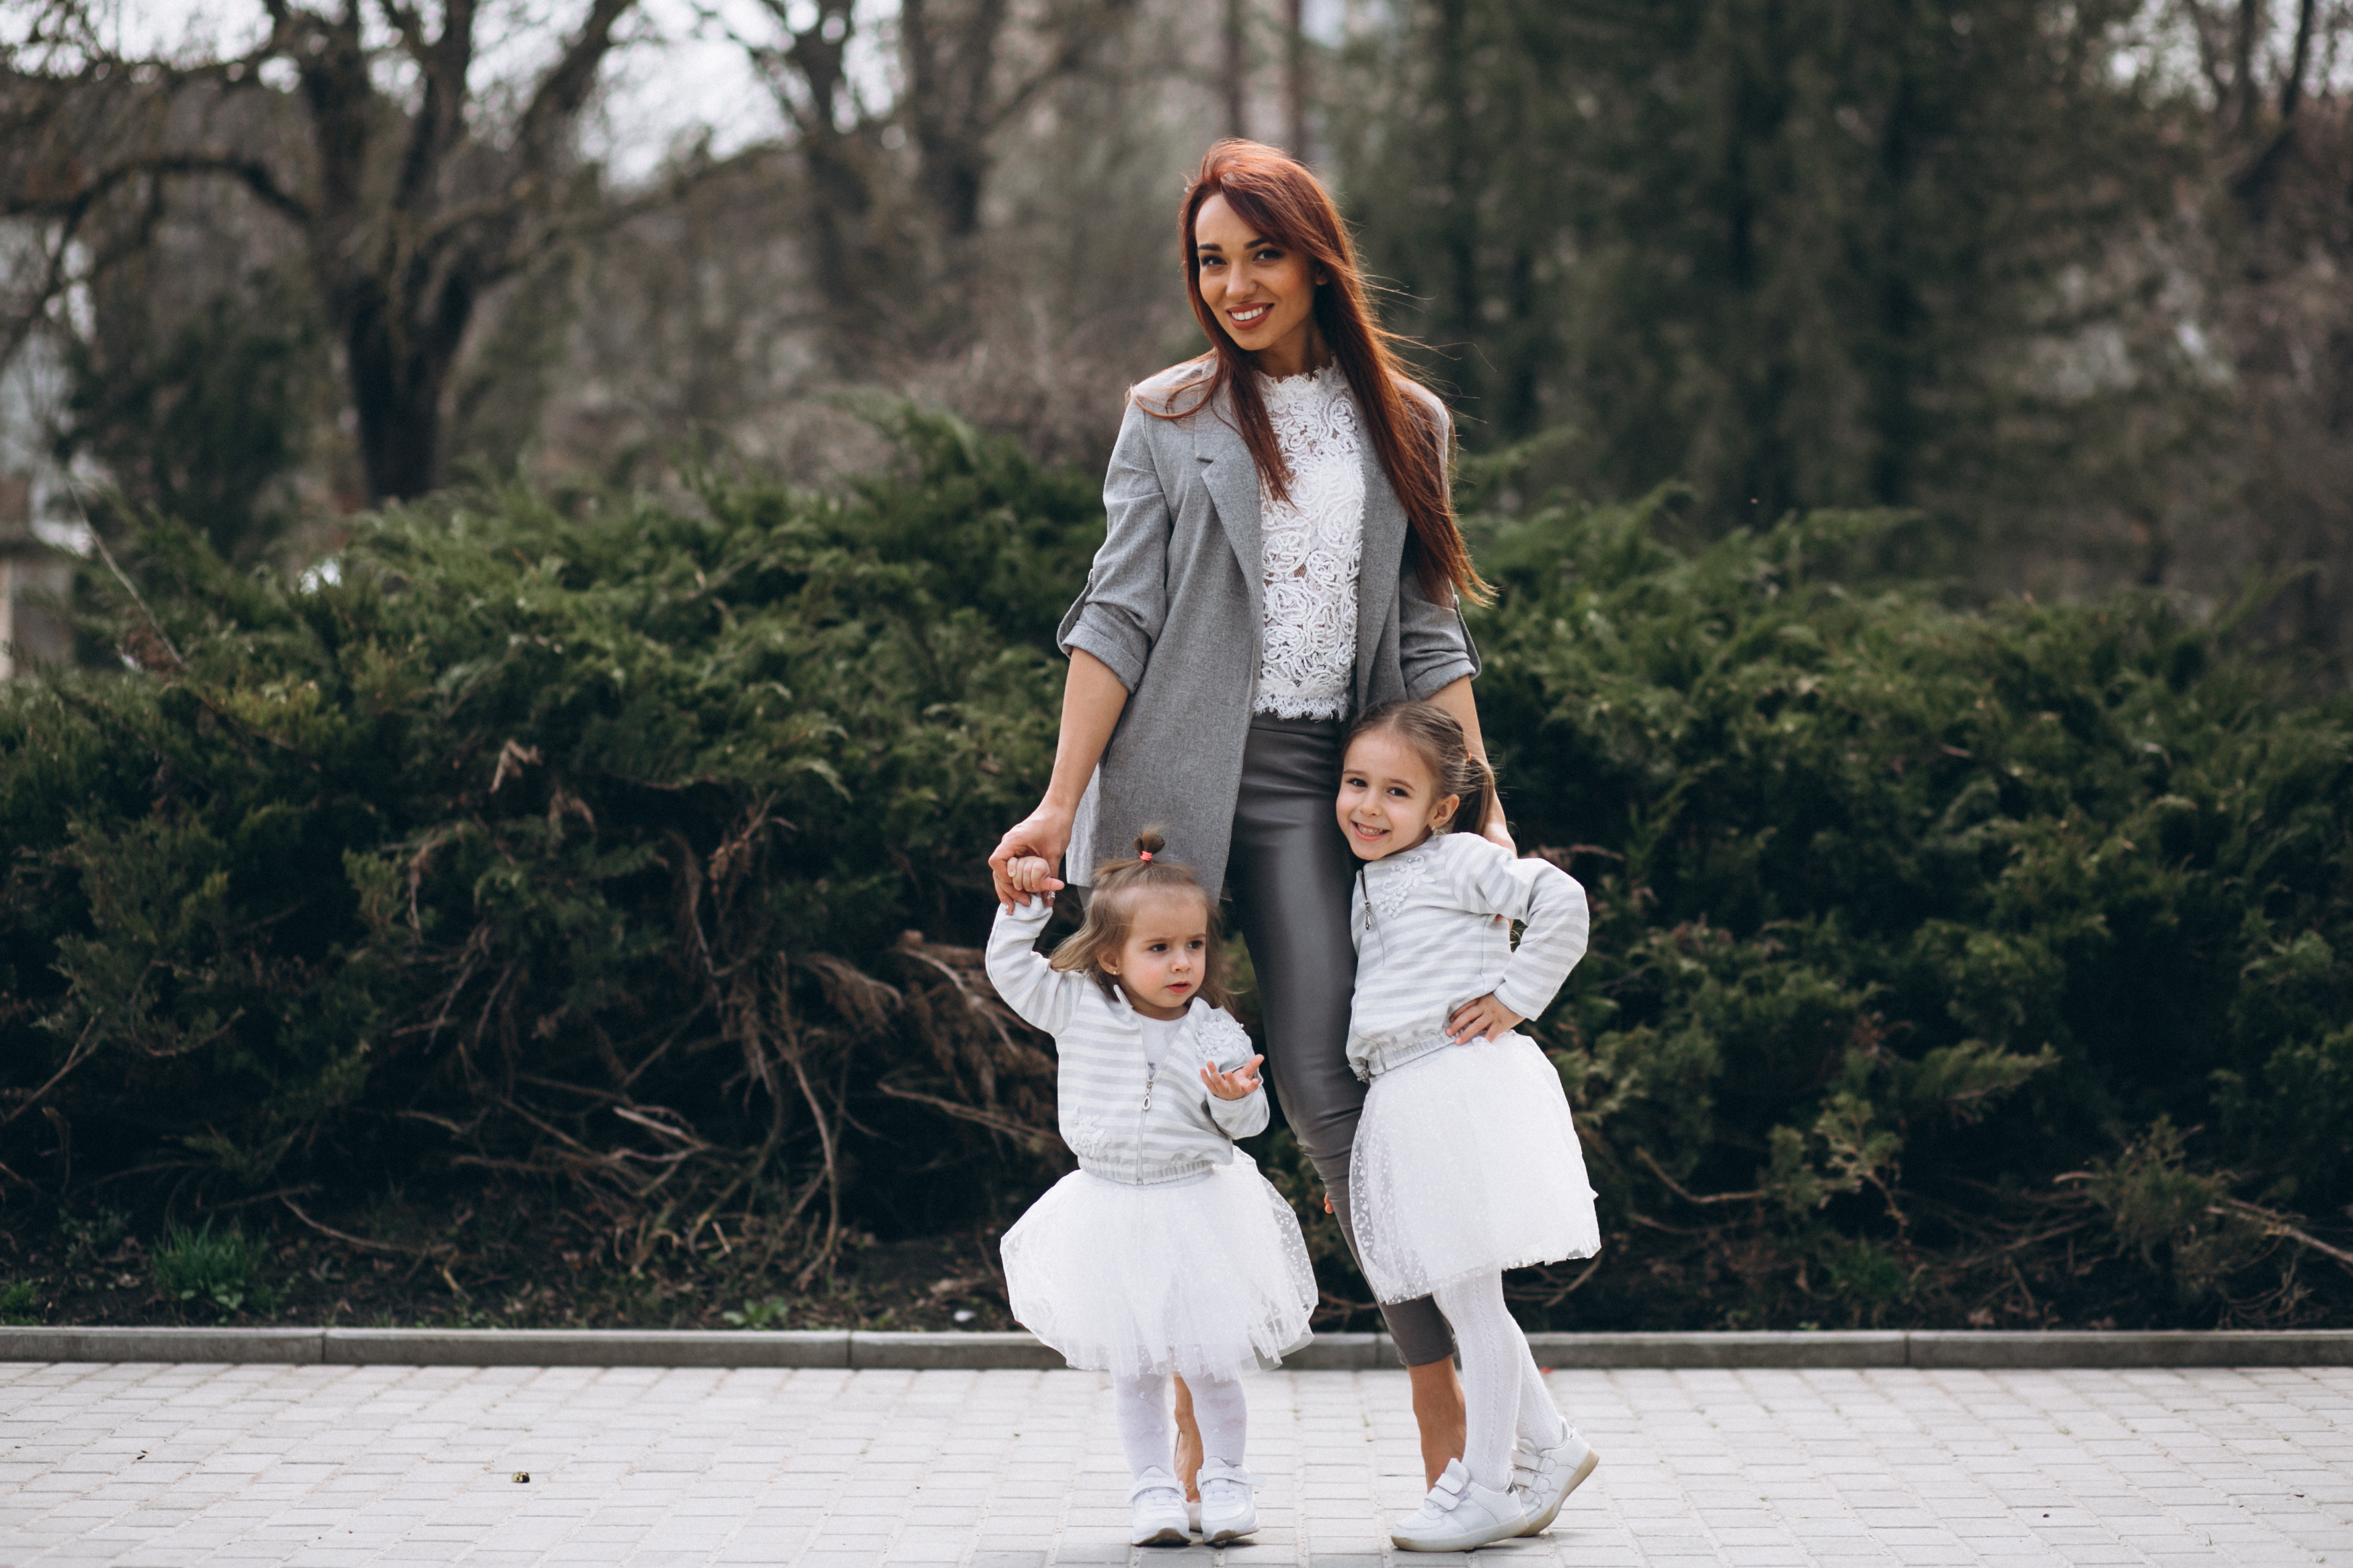 A woman and her two daughters | Source: freepik.com/senivpetro